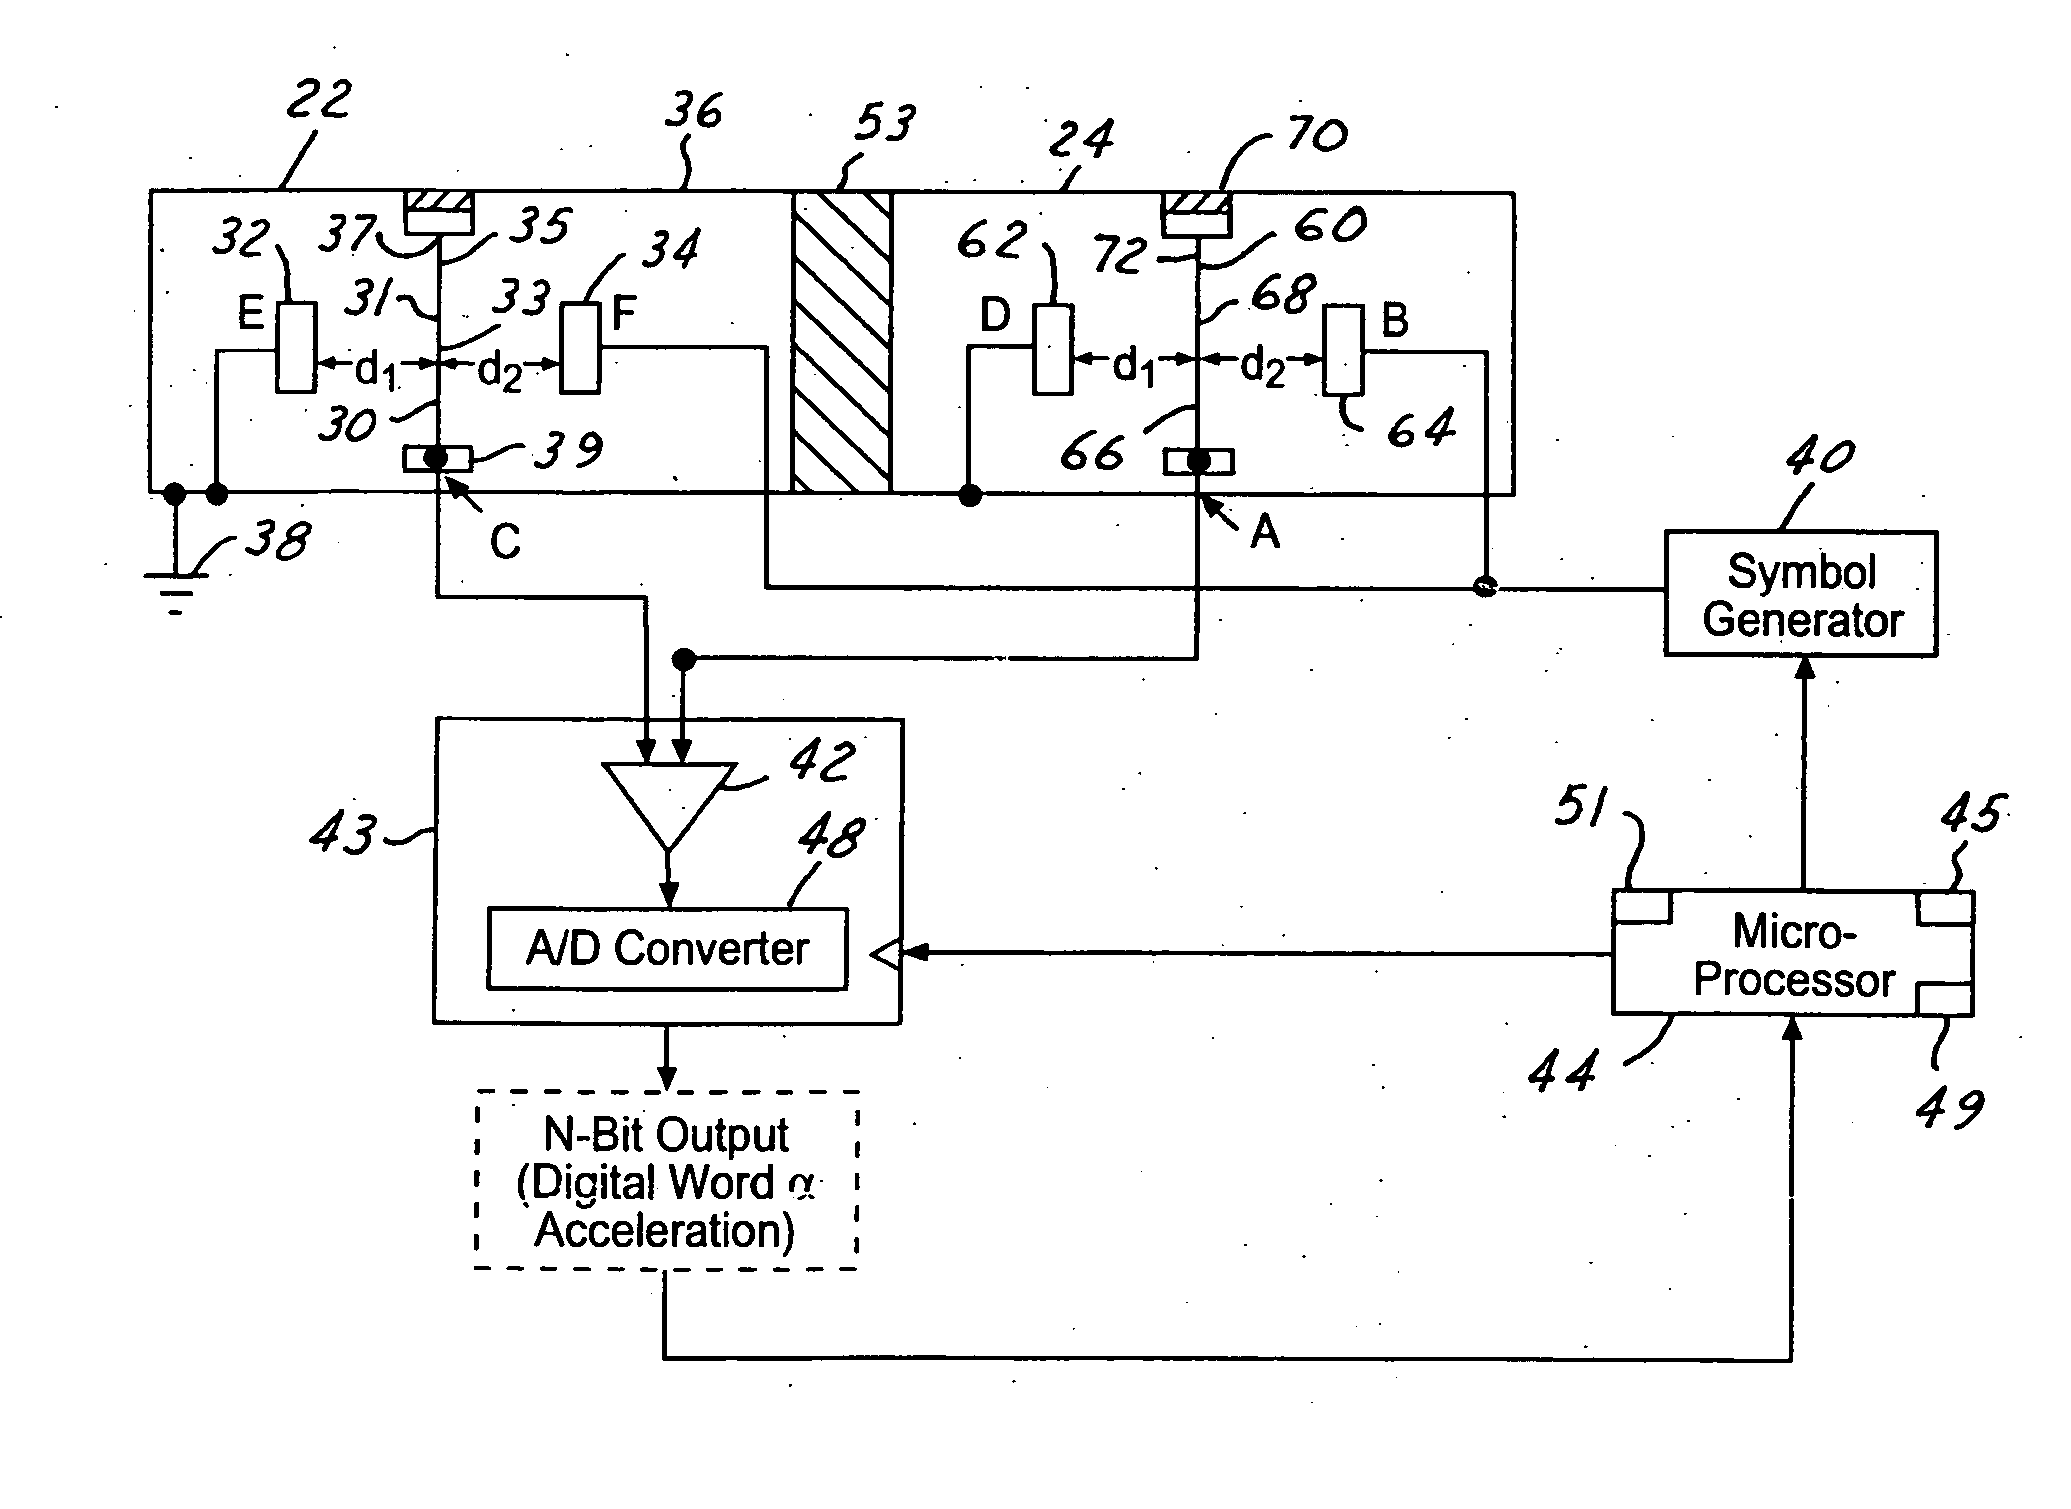 Extended accuracy variable capacitance bridge accelerometer